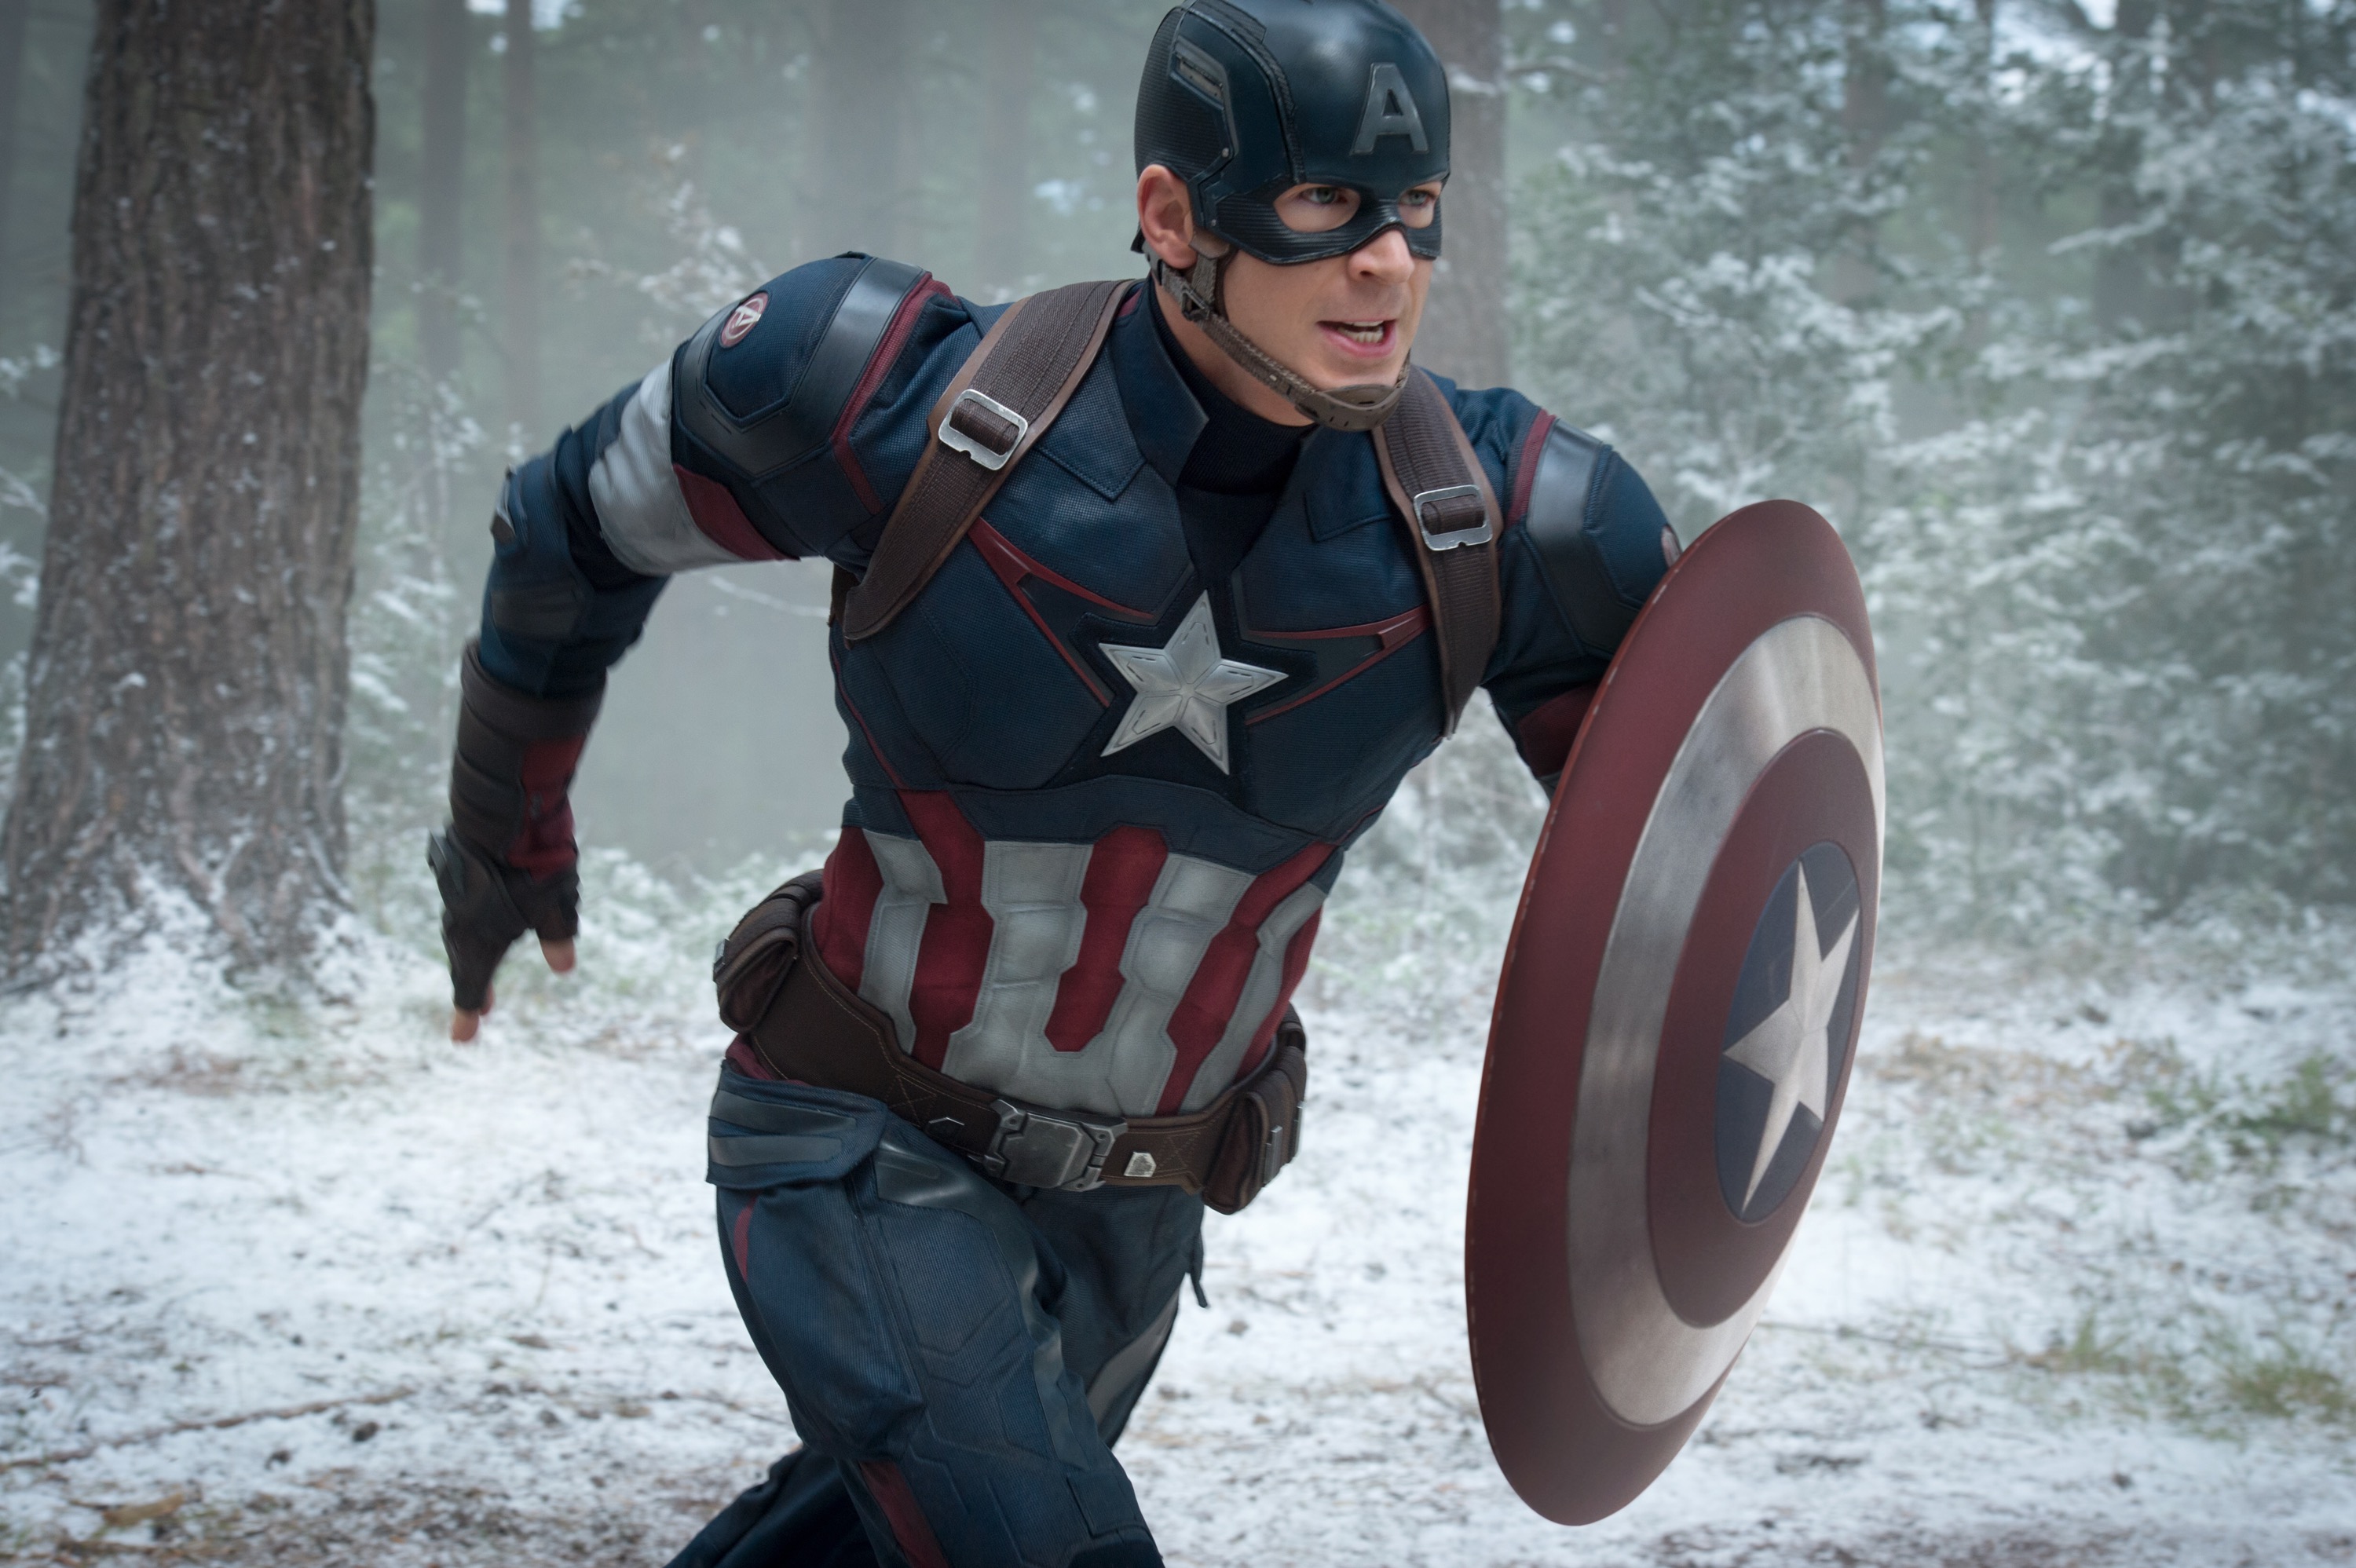 Captain America Avengers Age of Ultron Review | SparklyEverAfter.com